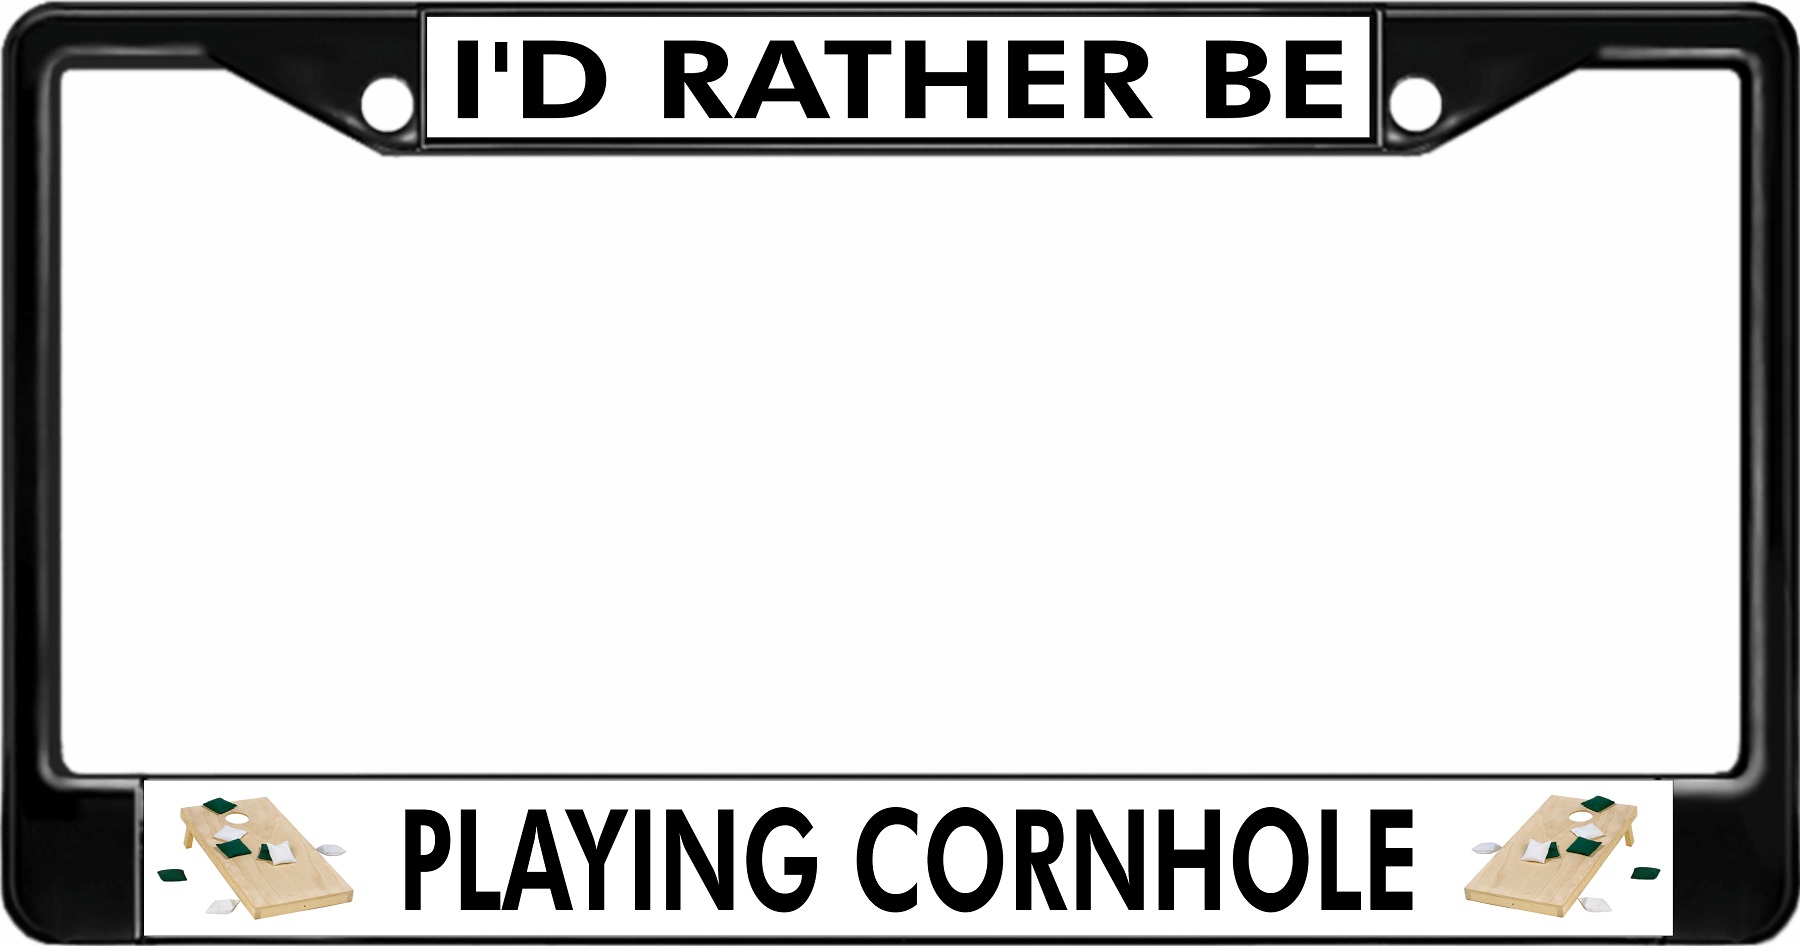 I'd Rather Be Playing Cornhole Black License Plate FRAME